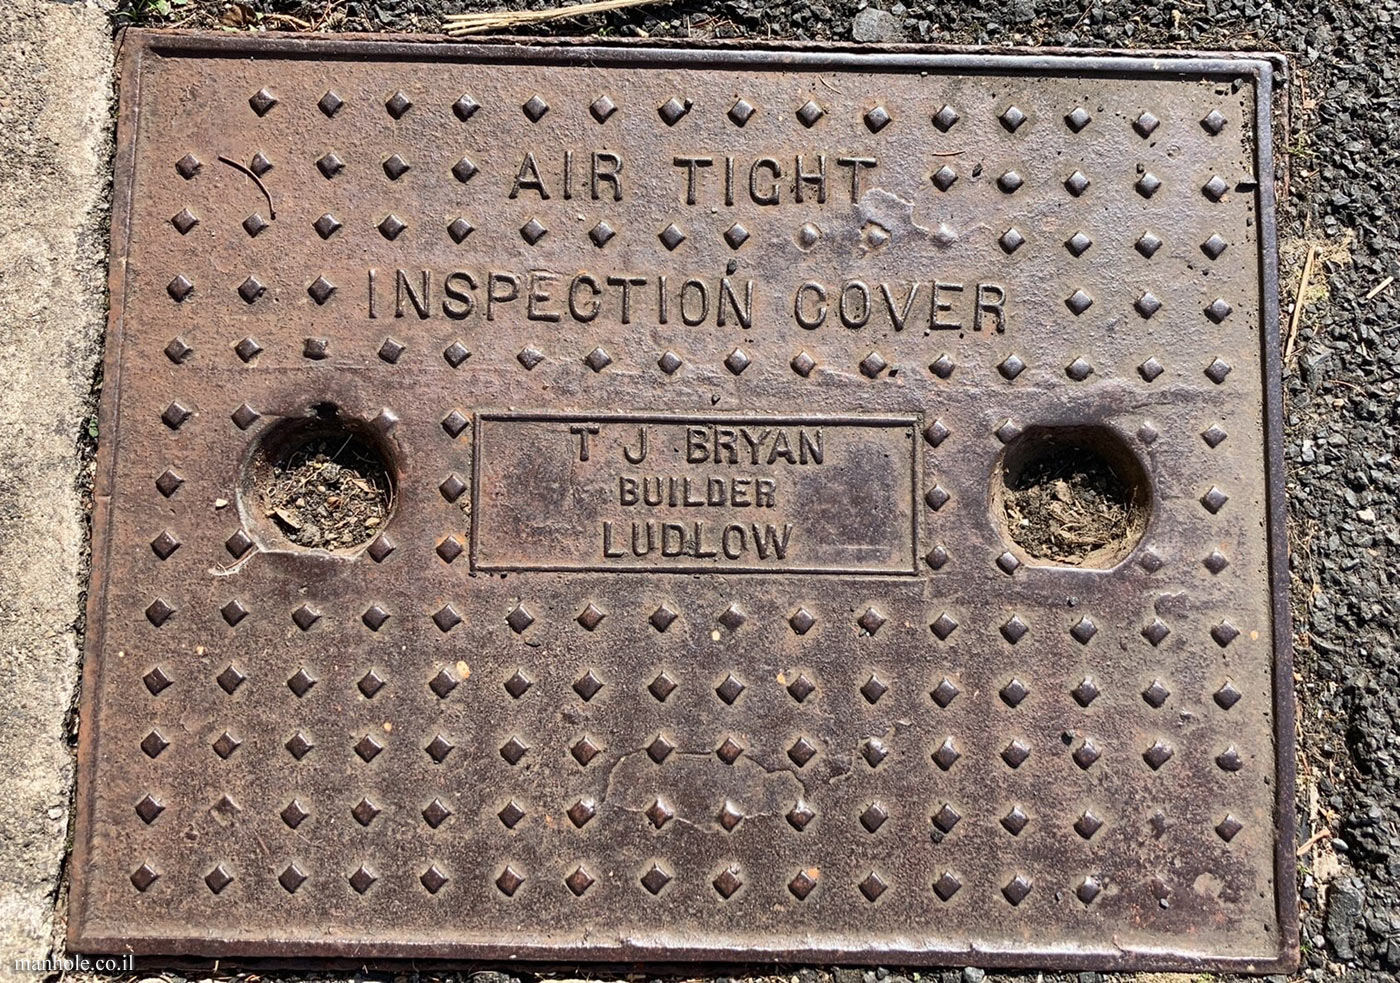 Ludlow - Air Tight Inspection Cover